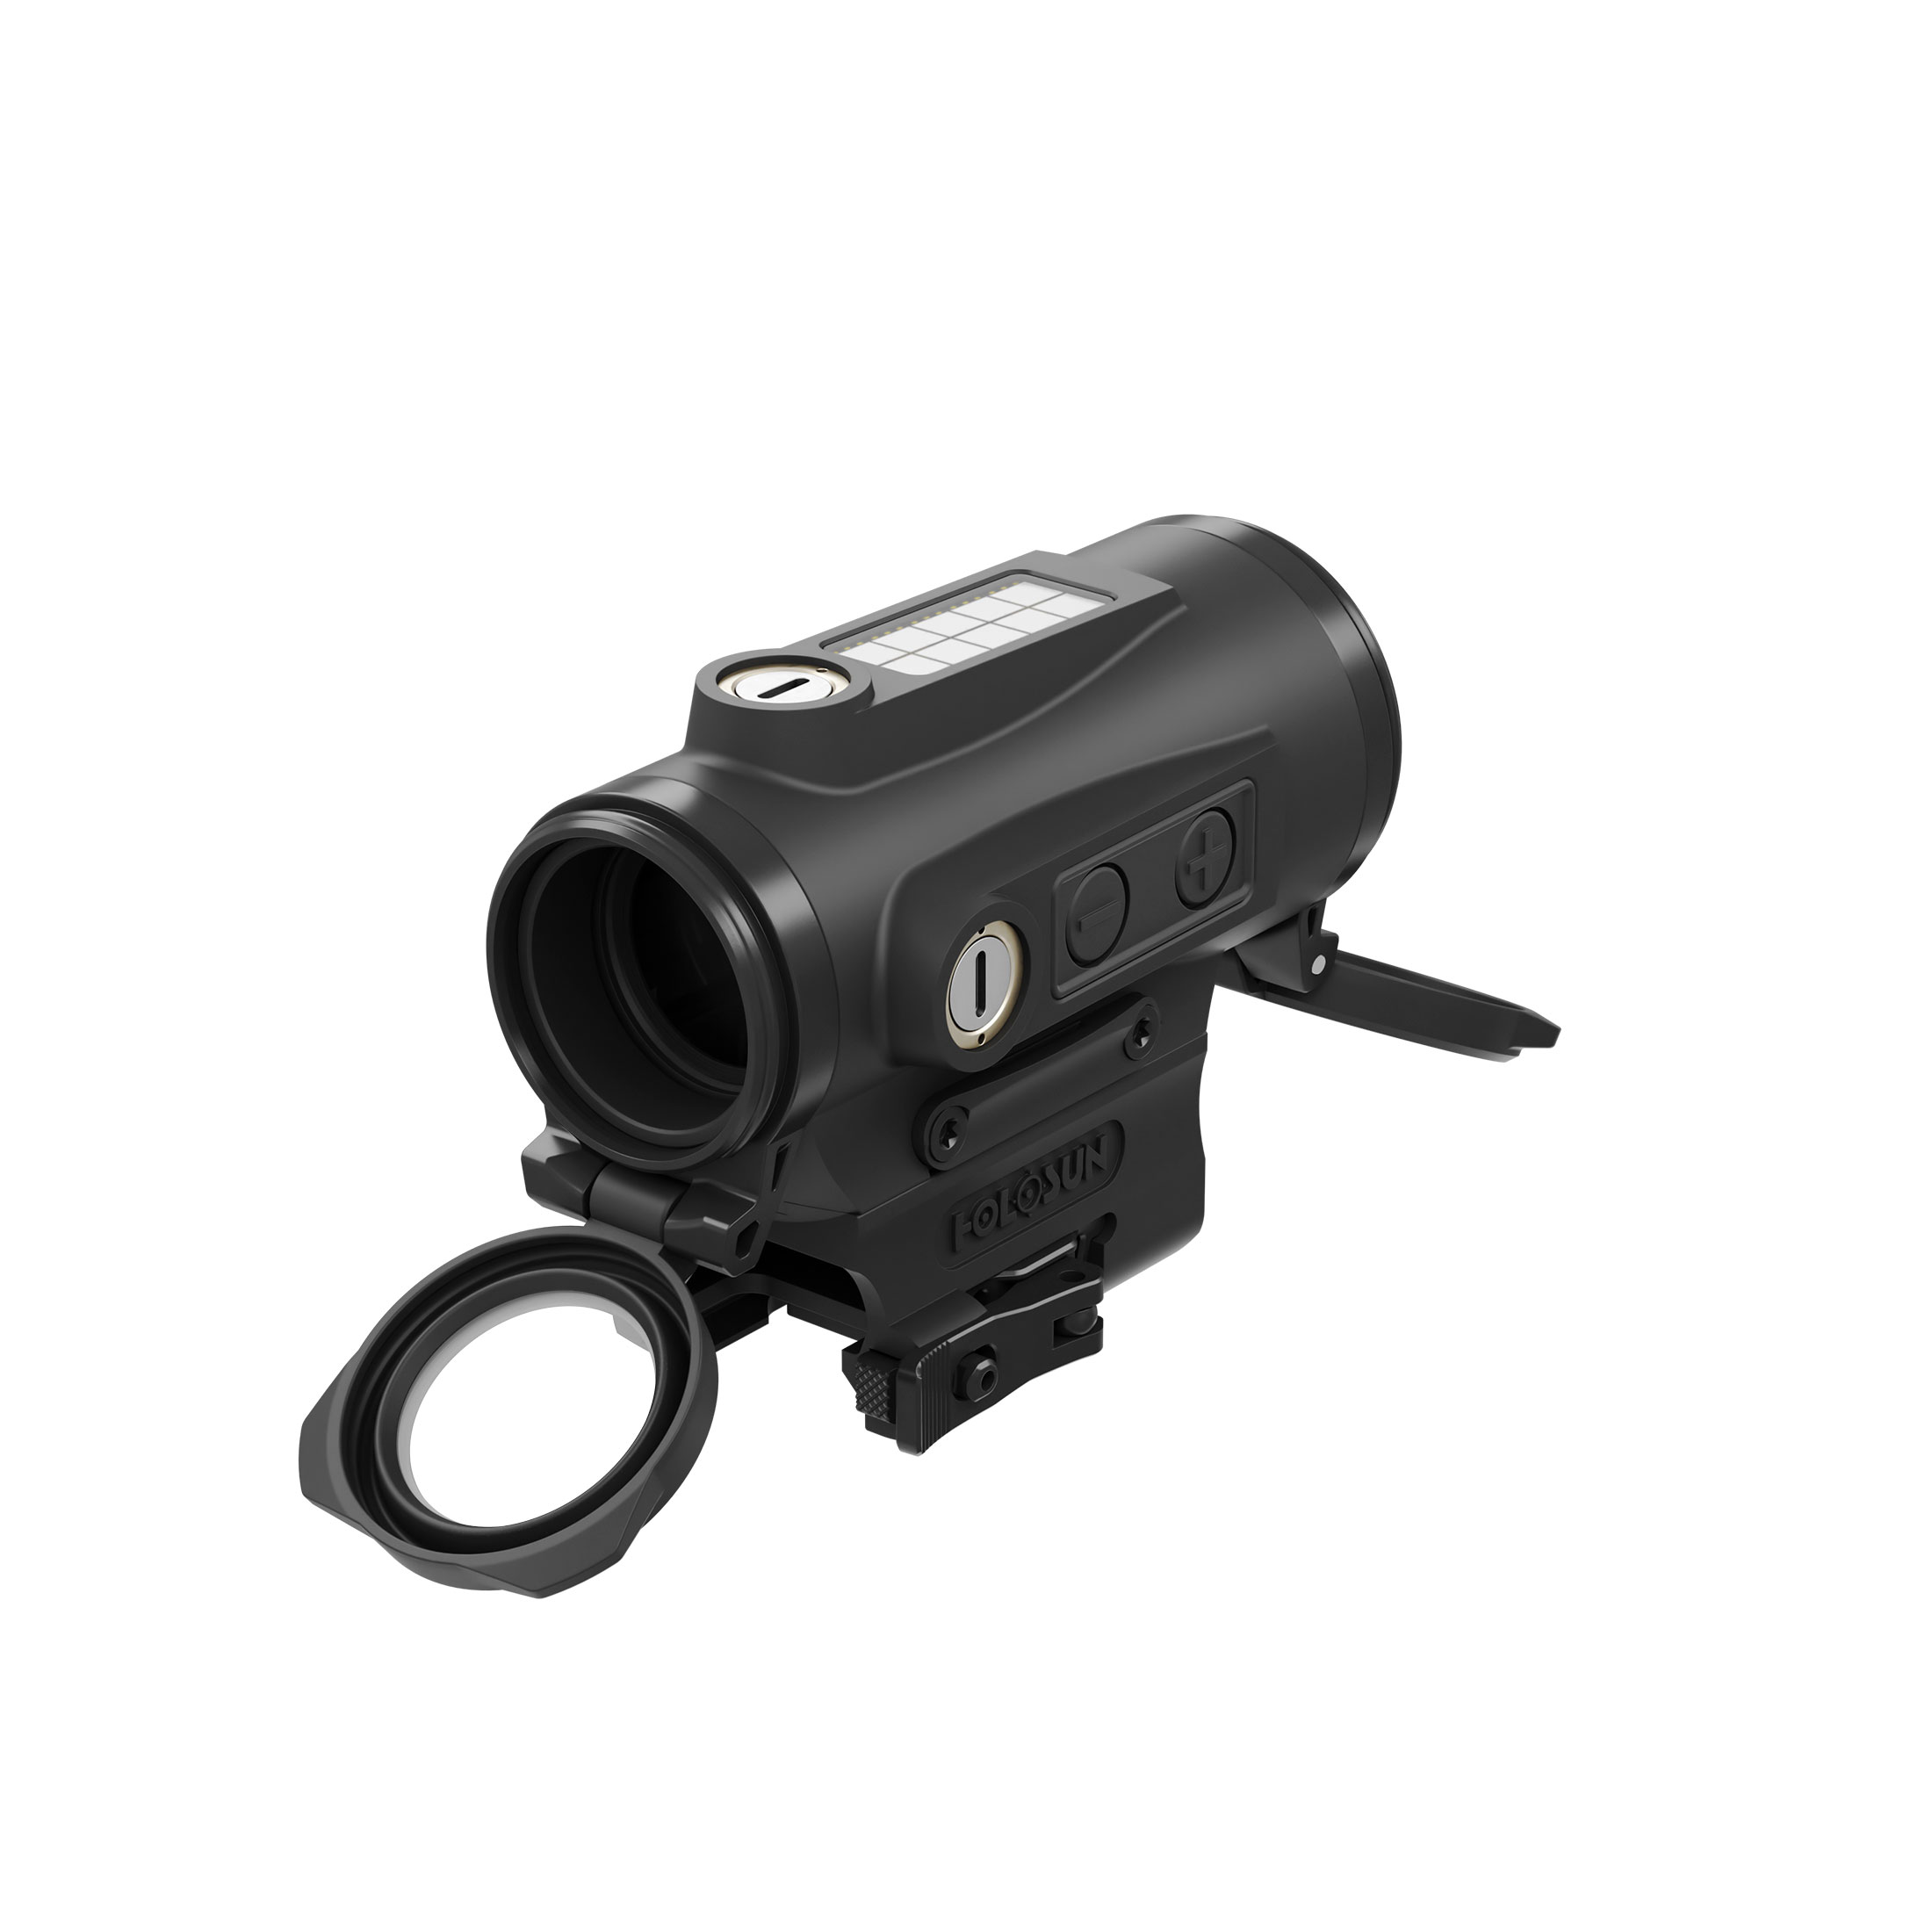 Holosun Green Dot Sight HE530C-GR switchable between Circle Dot and Single Dot, solar cell and a fu…